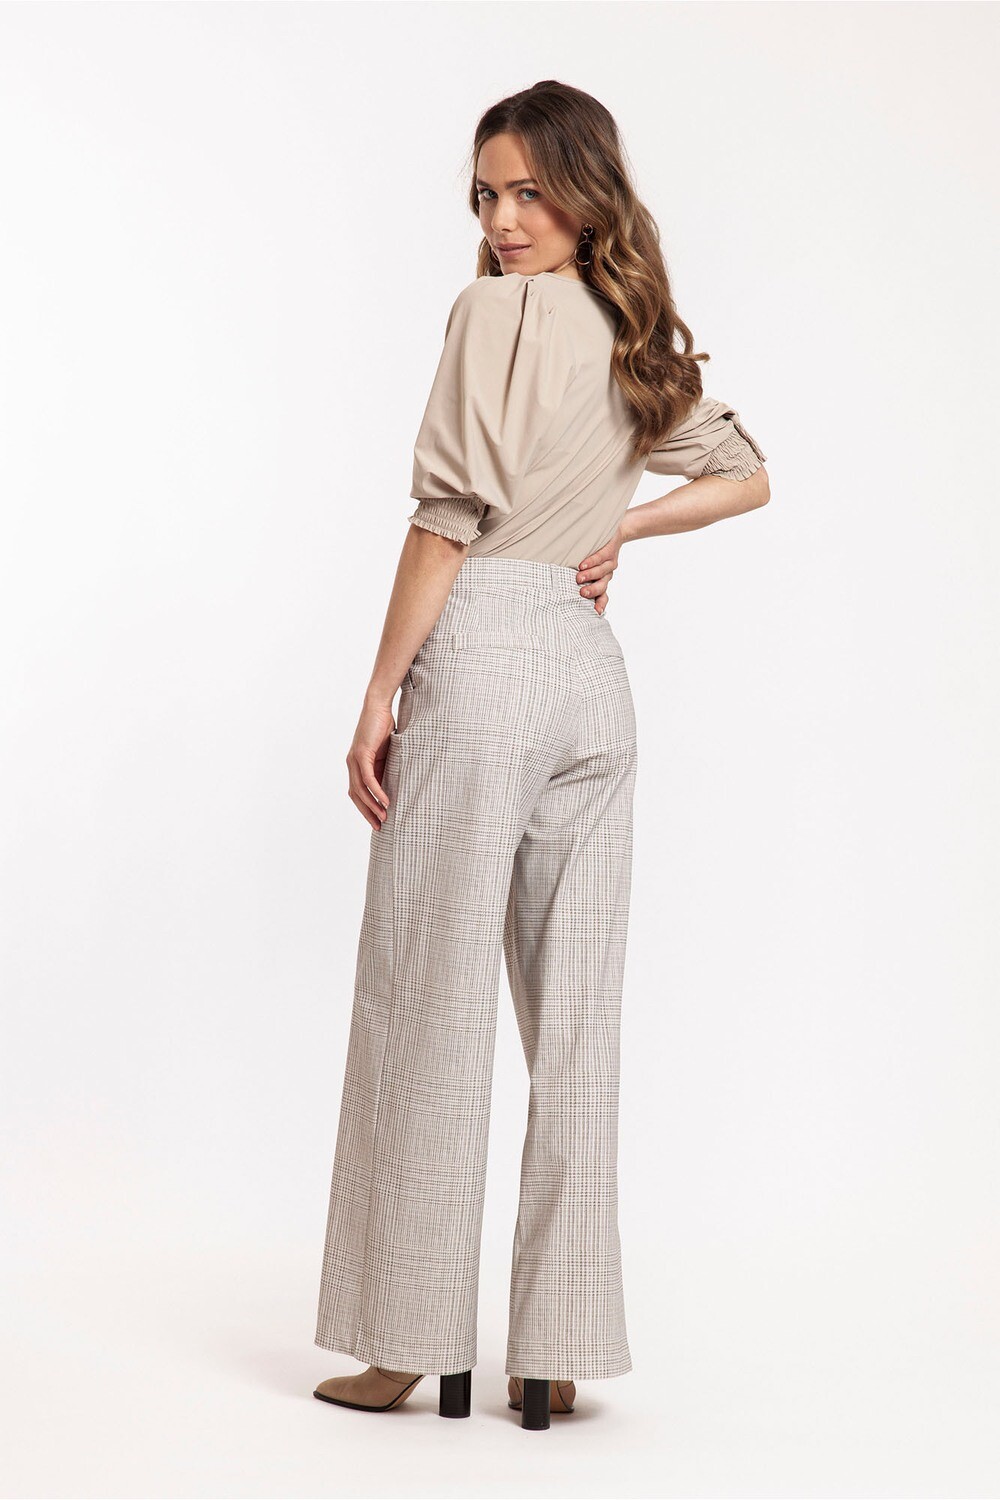 Studio Anneloes Sola check trousers, beige